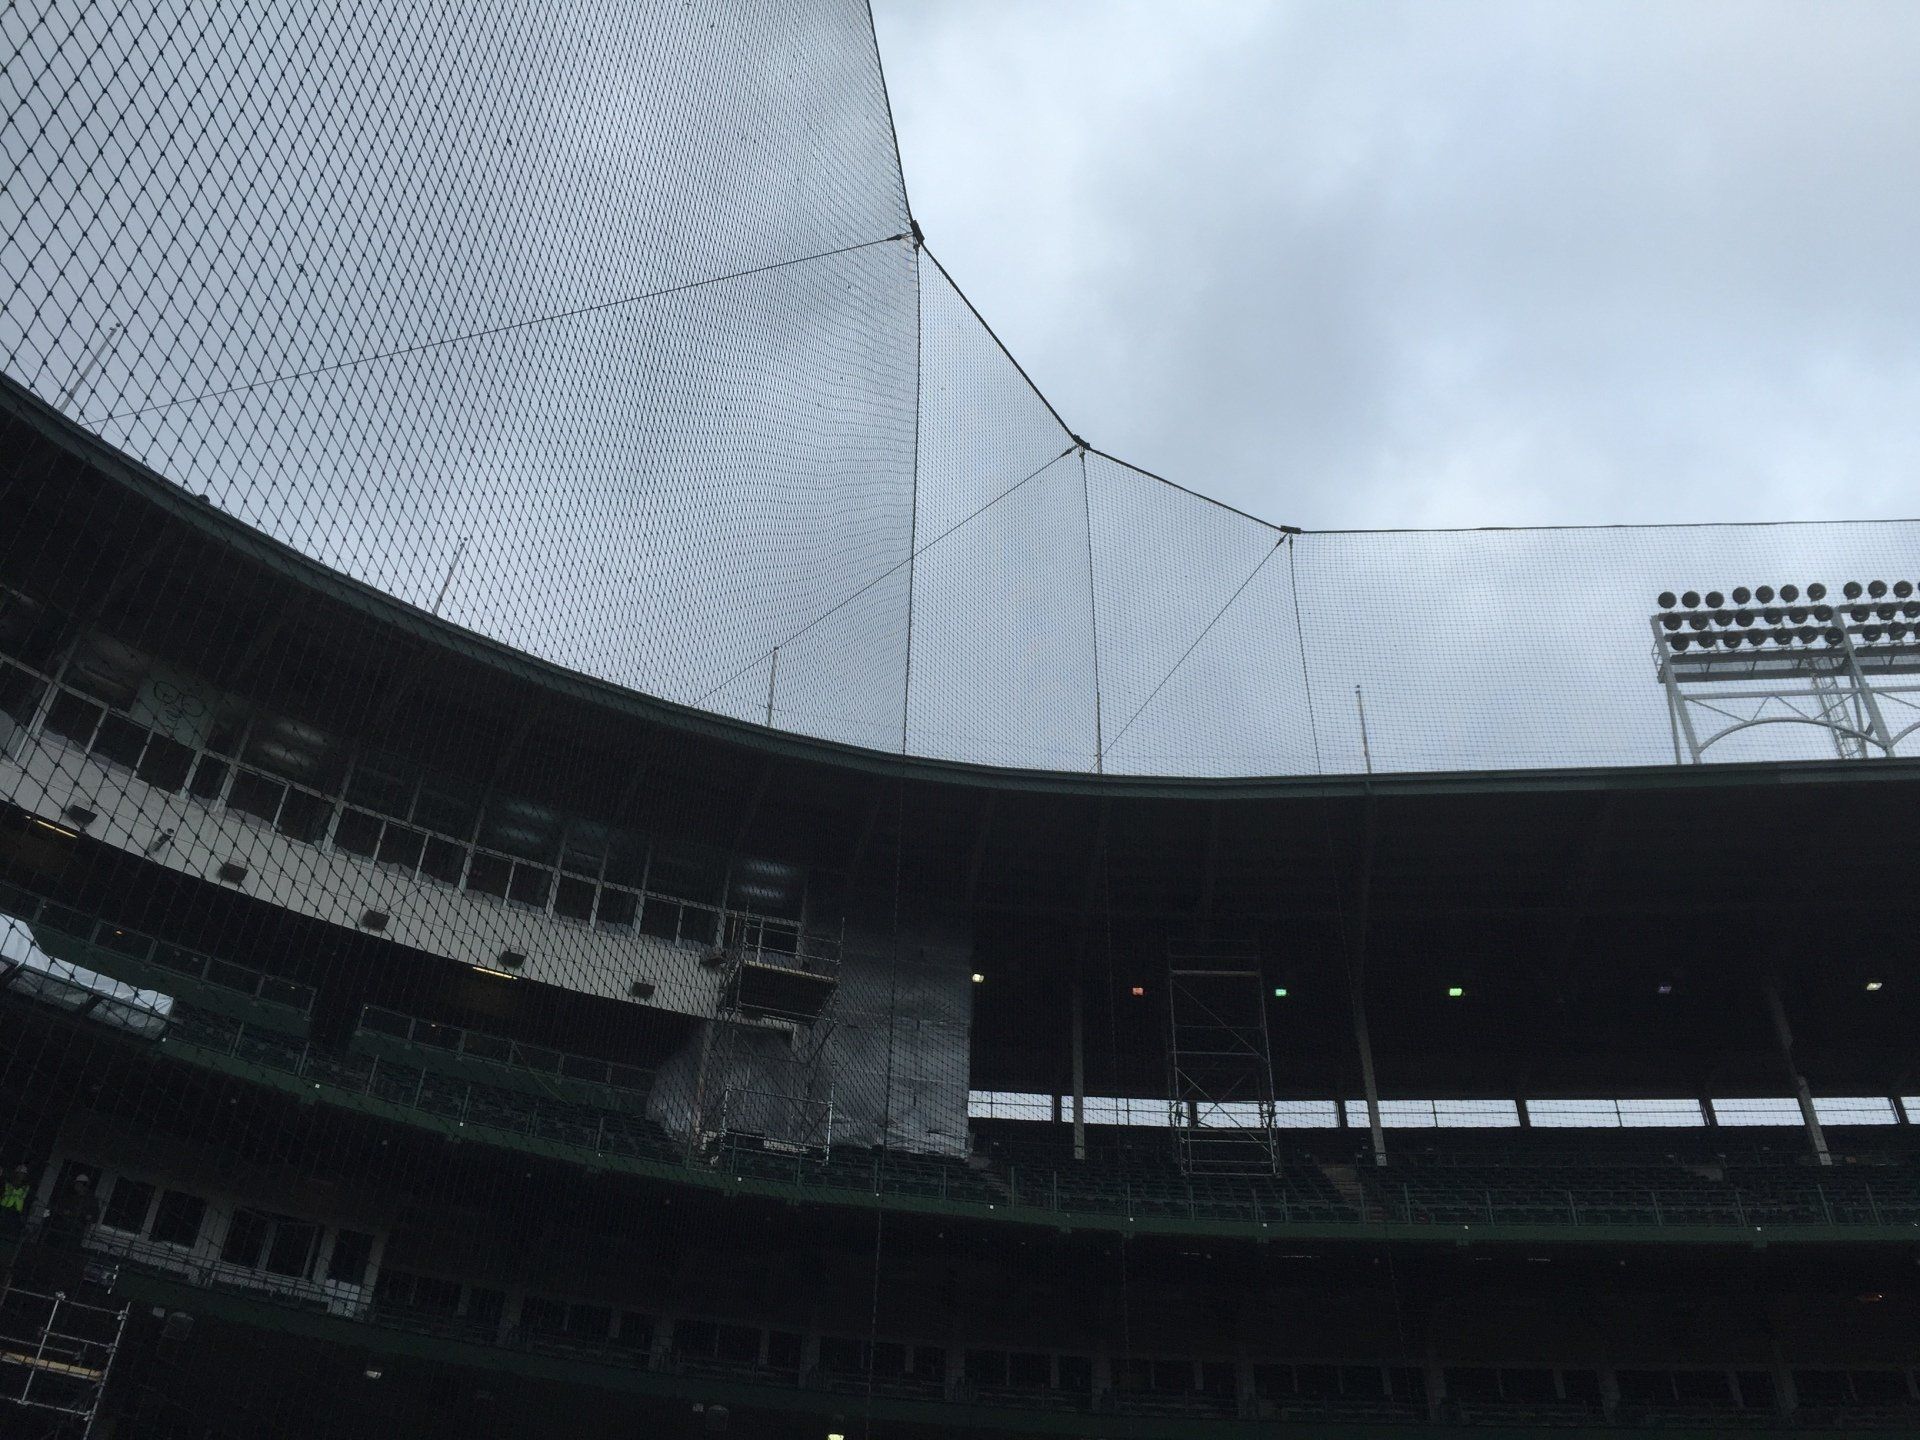 The inside of a baseball stadium with a net covering the stands